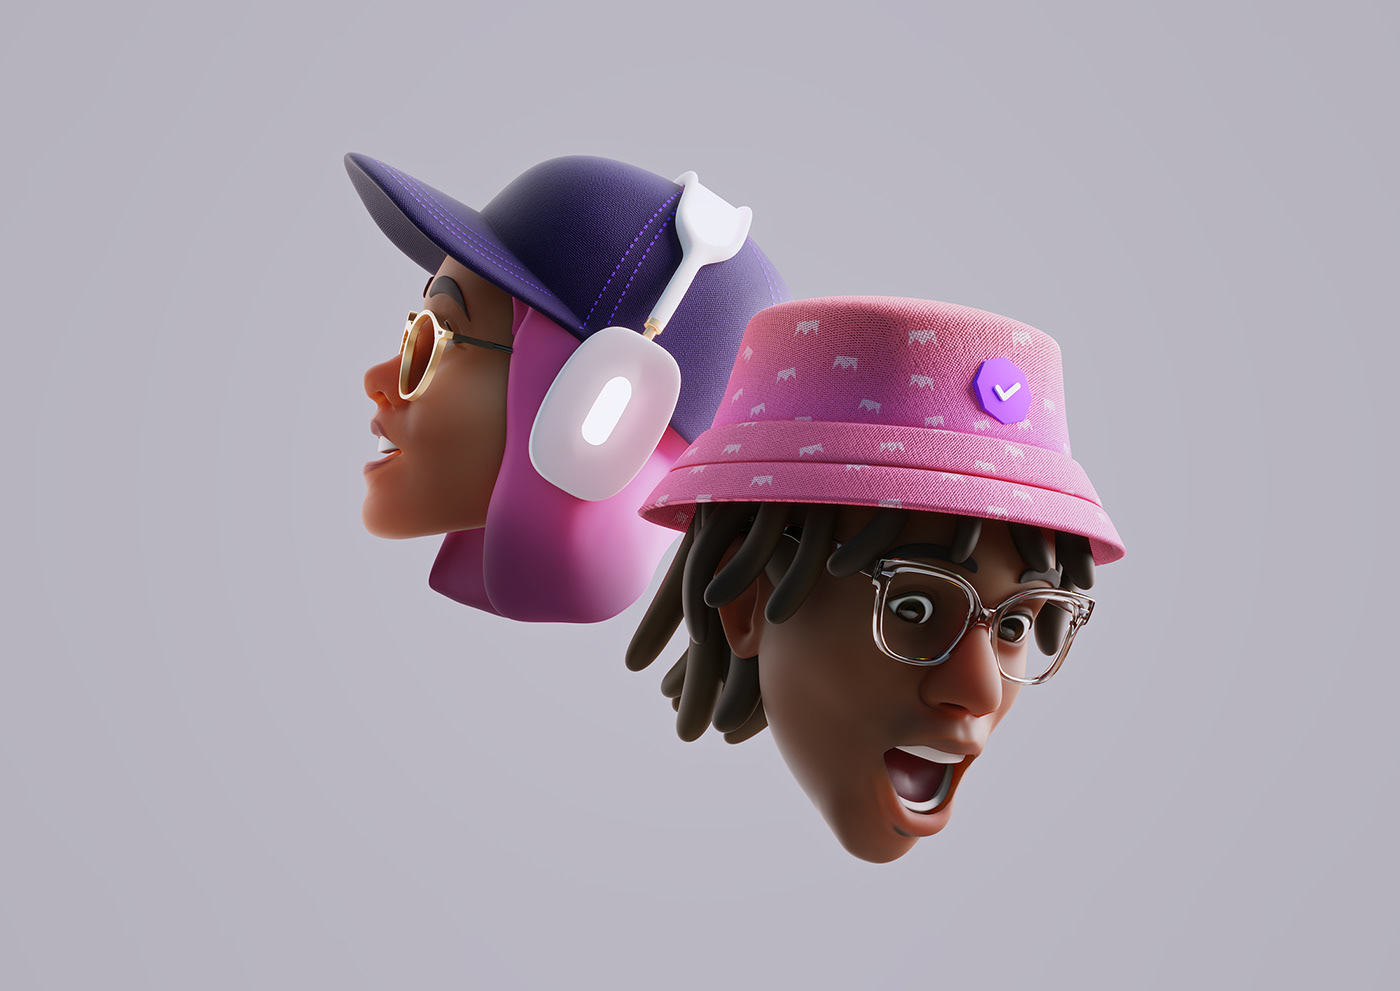 Artifact from the 3D Illustrations Enhance Twitch App on Apple Store article on Abduzeedo